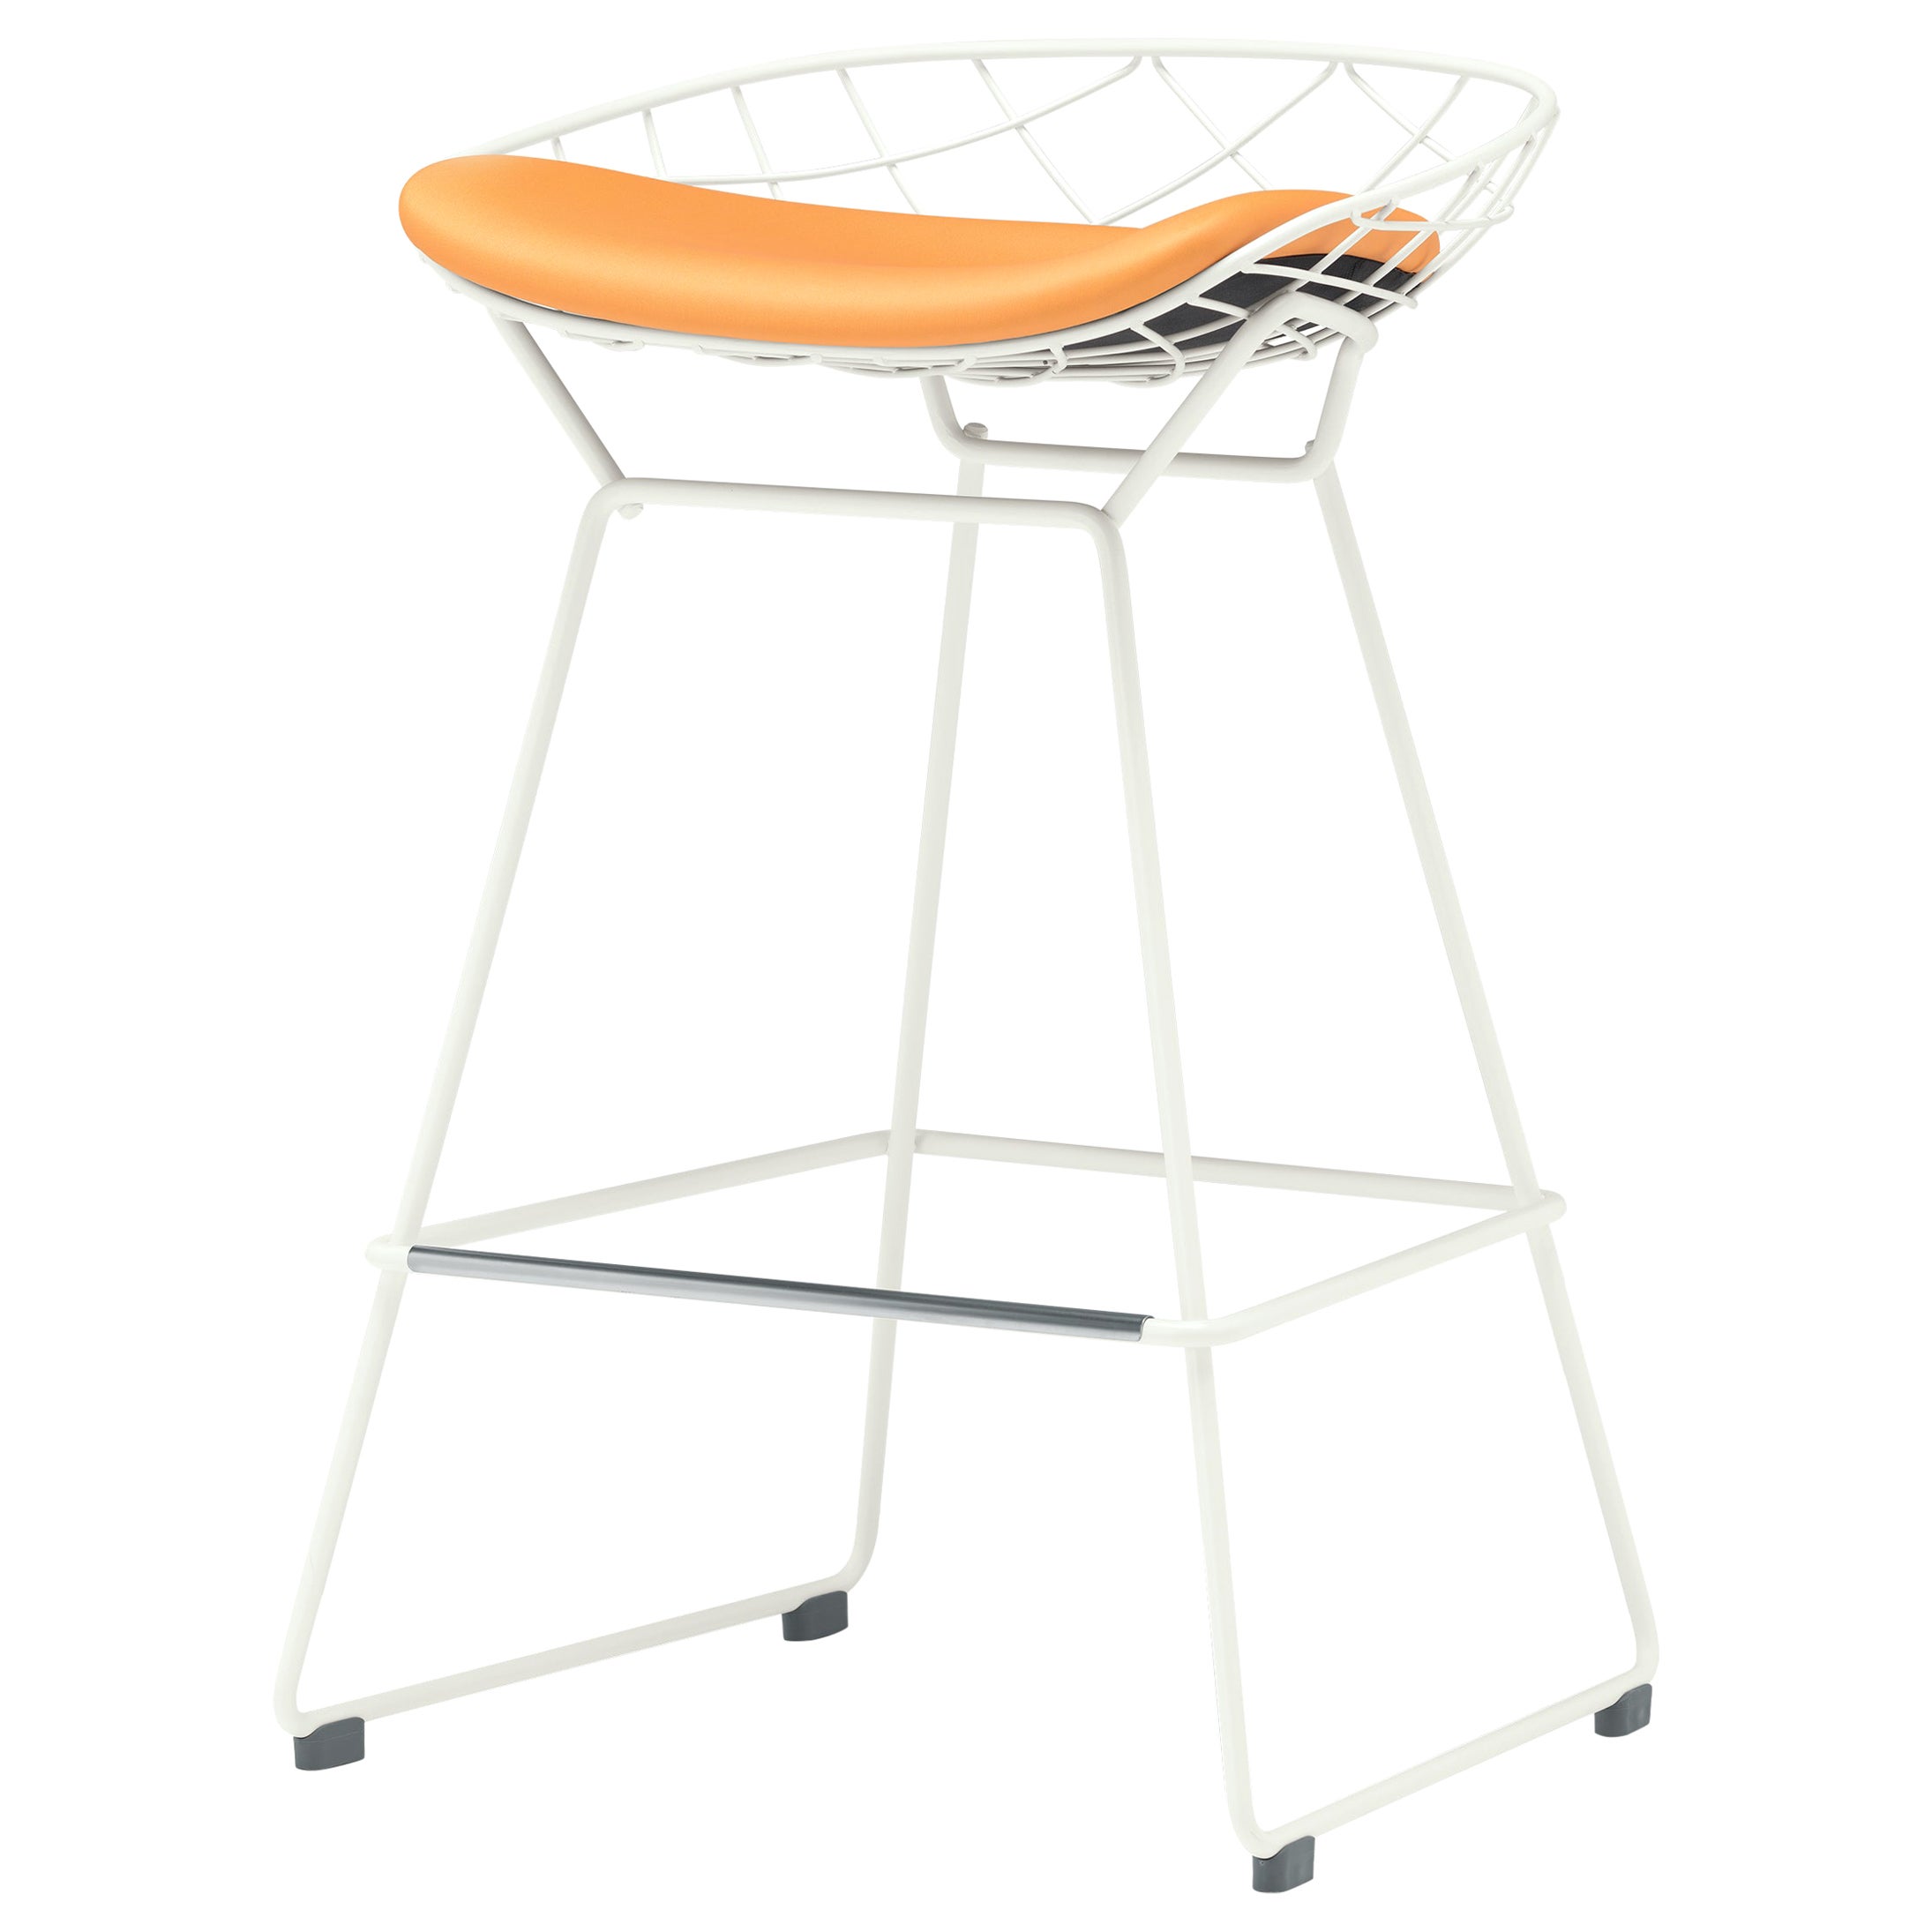 Alias N02 Kobi Outdoor Stool in Orange Leather Seat with White Lacquered Frame For Sale